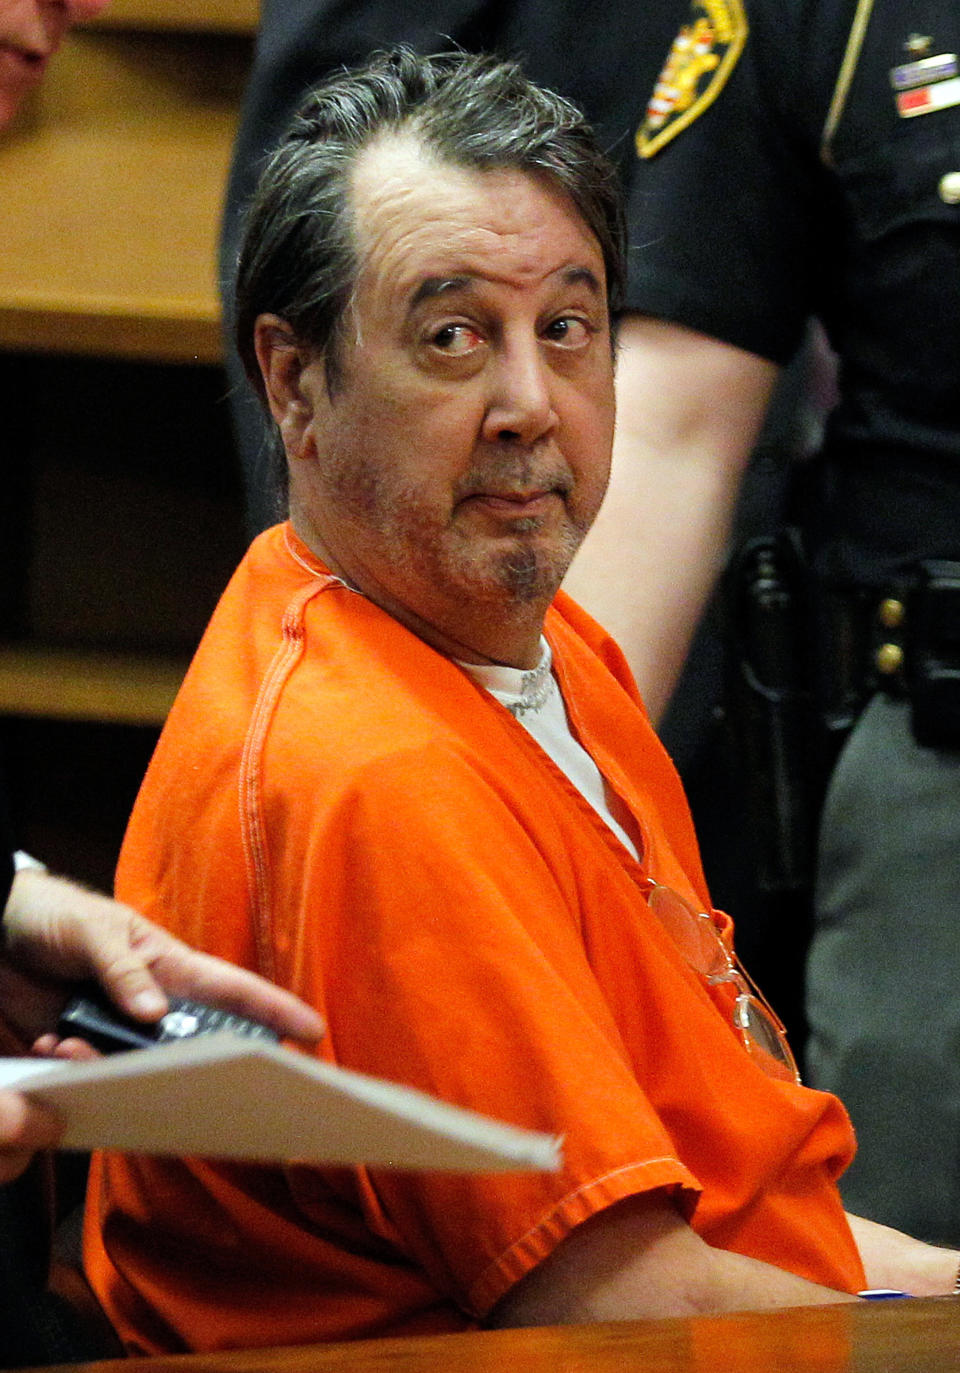 Bobby Thompson appears at a hearing in Cuyahoga County Court in Cleveland on Tuesday, May 8, 2012. Thompson is accused of running a scam that collected millions in donations from people who believed they were helping U.S. Navy veterans. (AP Photo/Amy Sancetta)